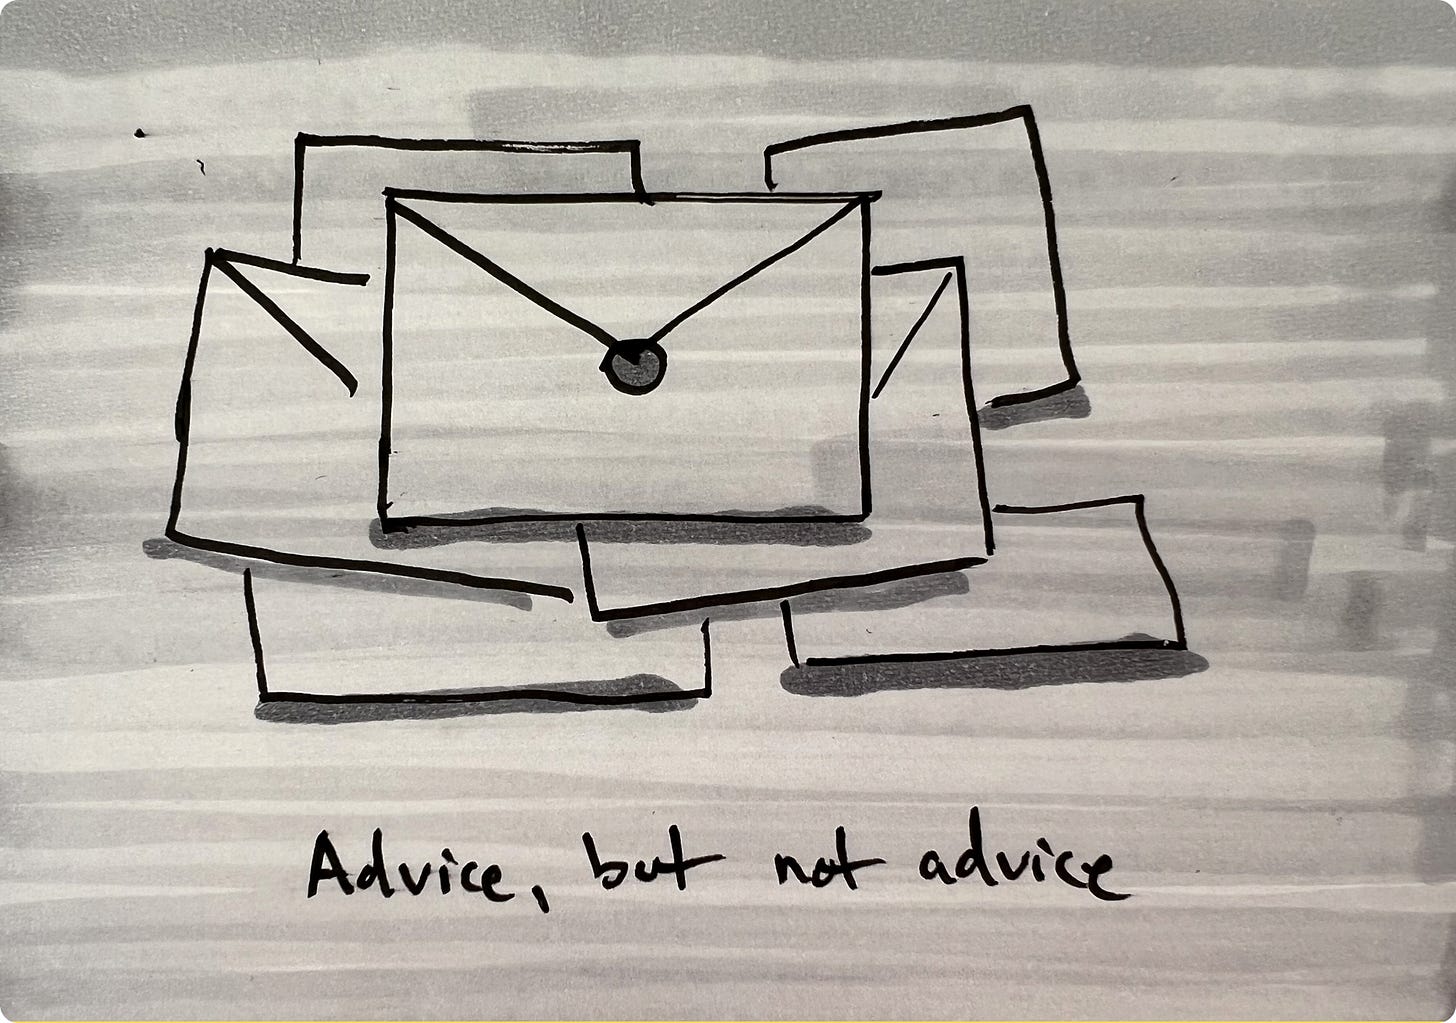 Drawings of envelopes with the text "Advice, but not advice"